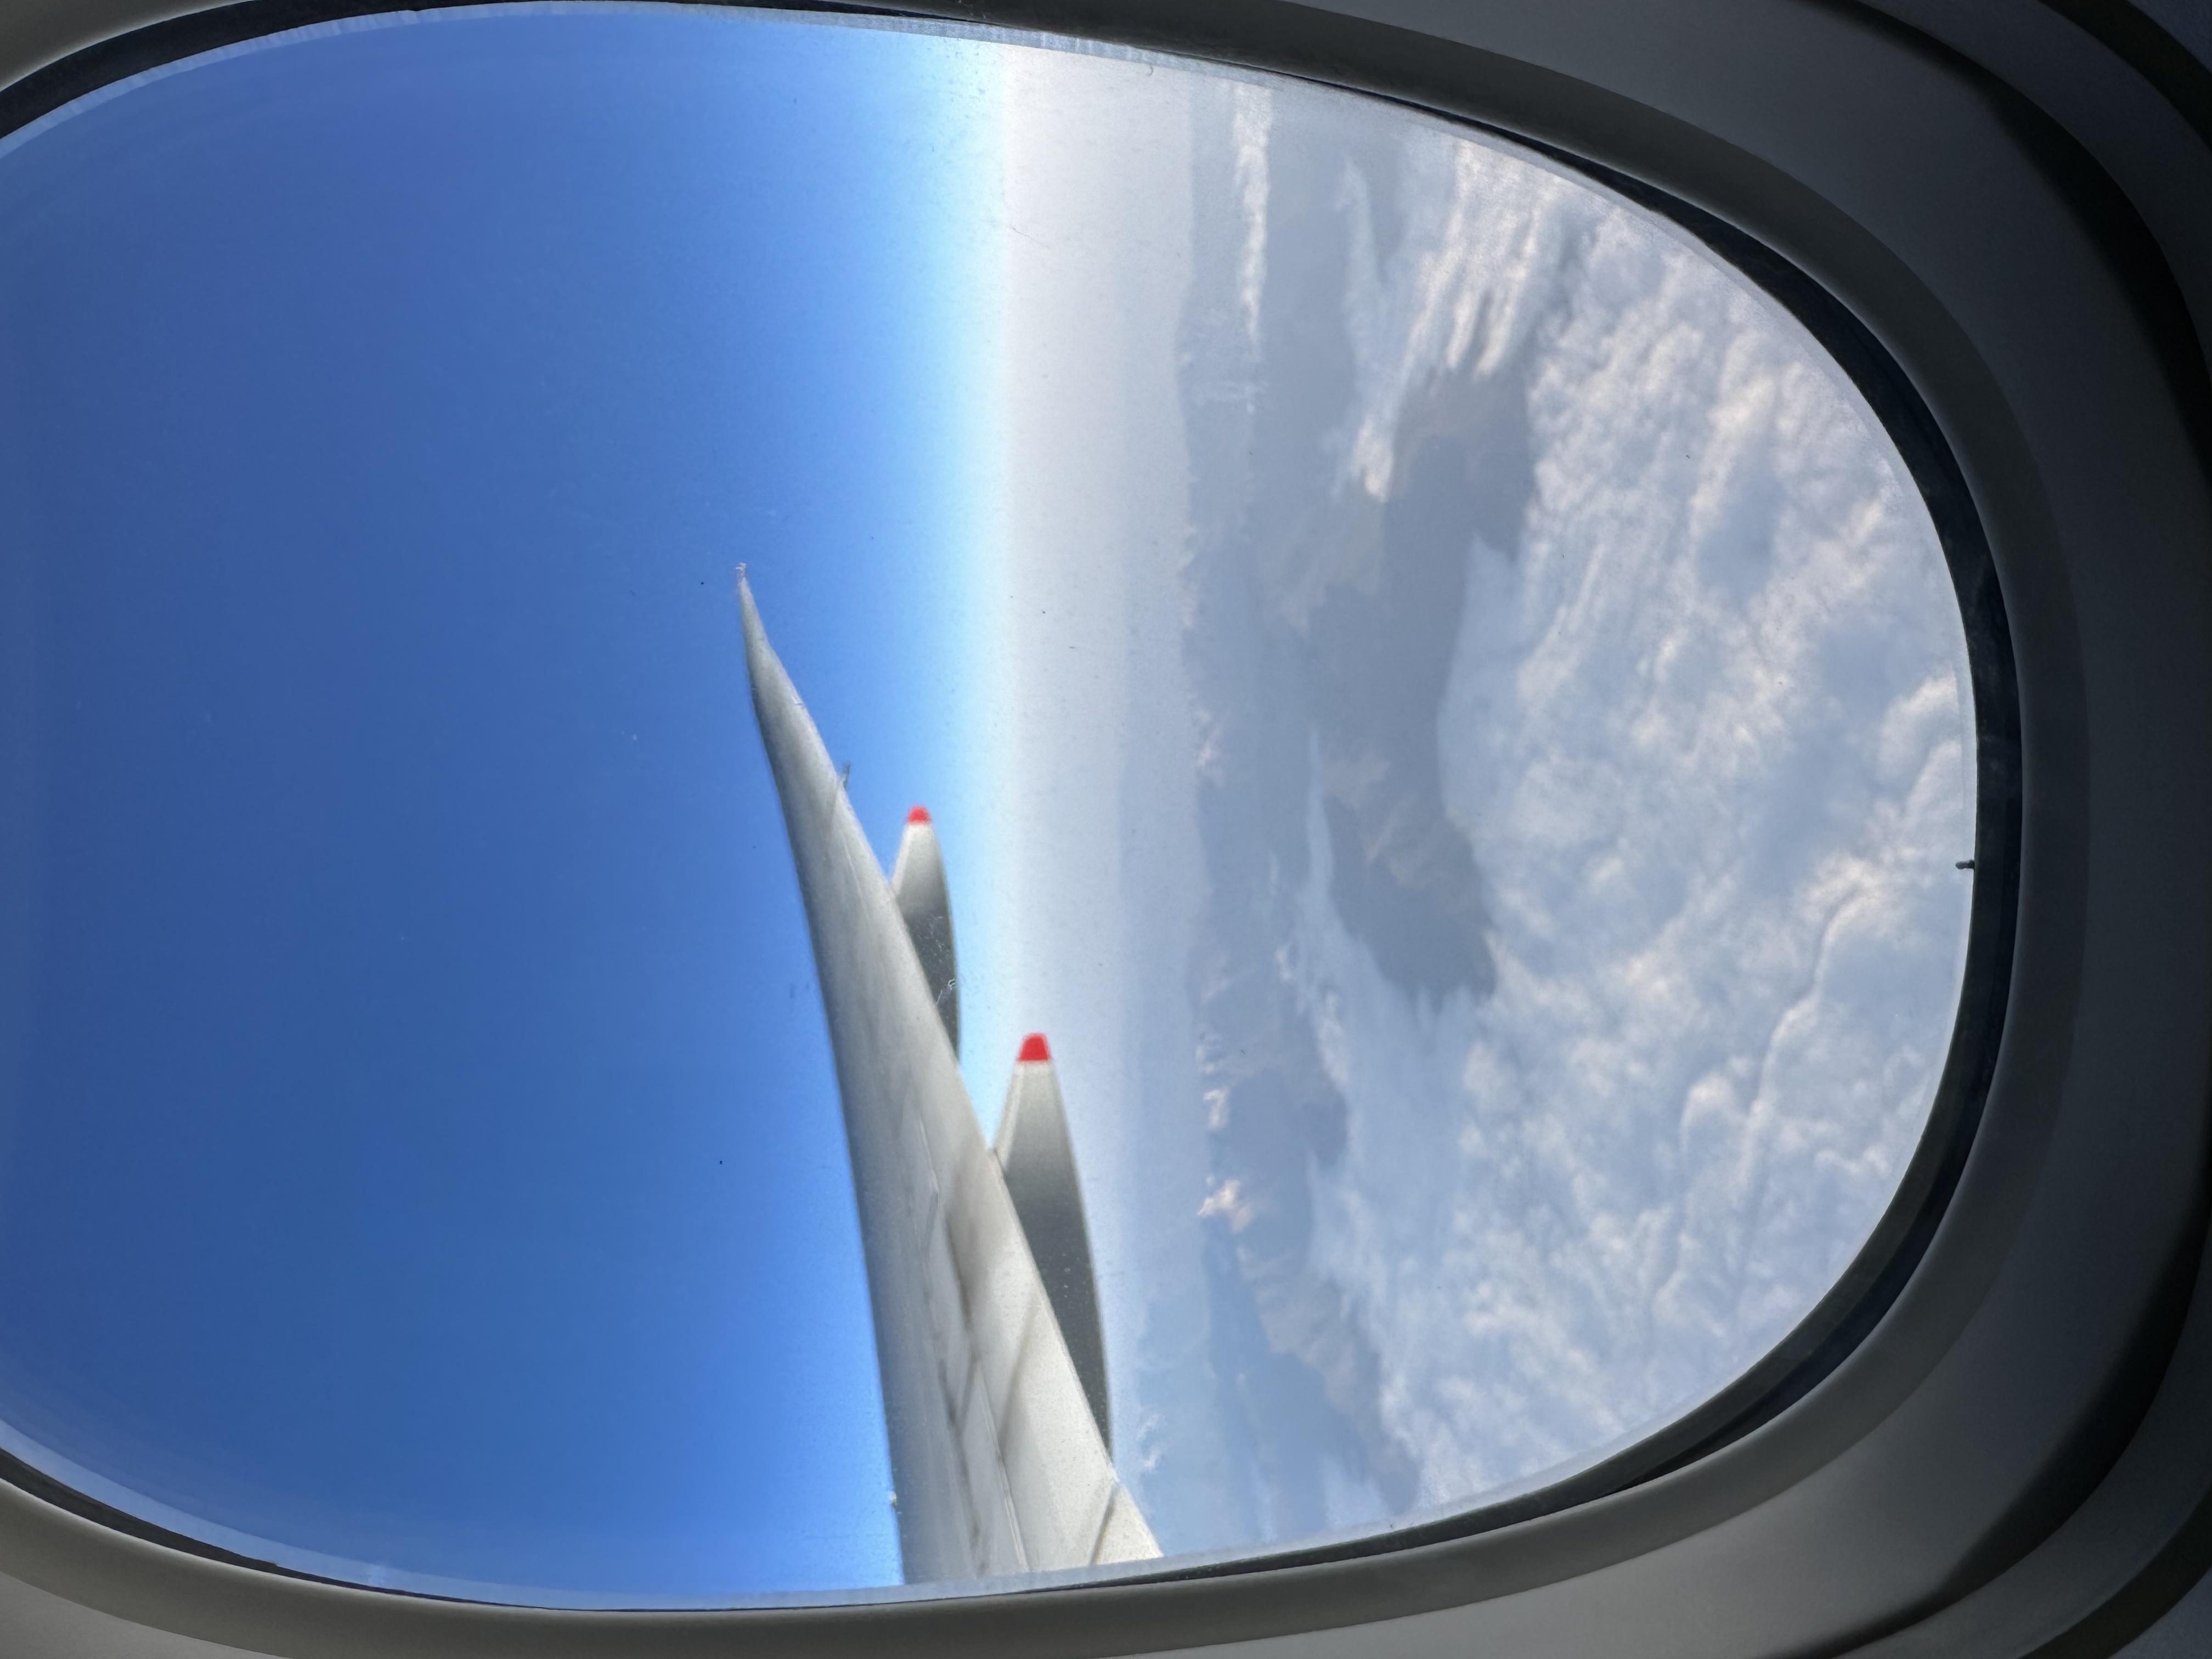 A photo taken out the window of a plane.